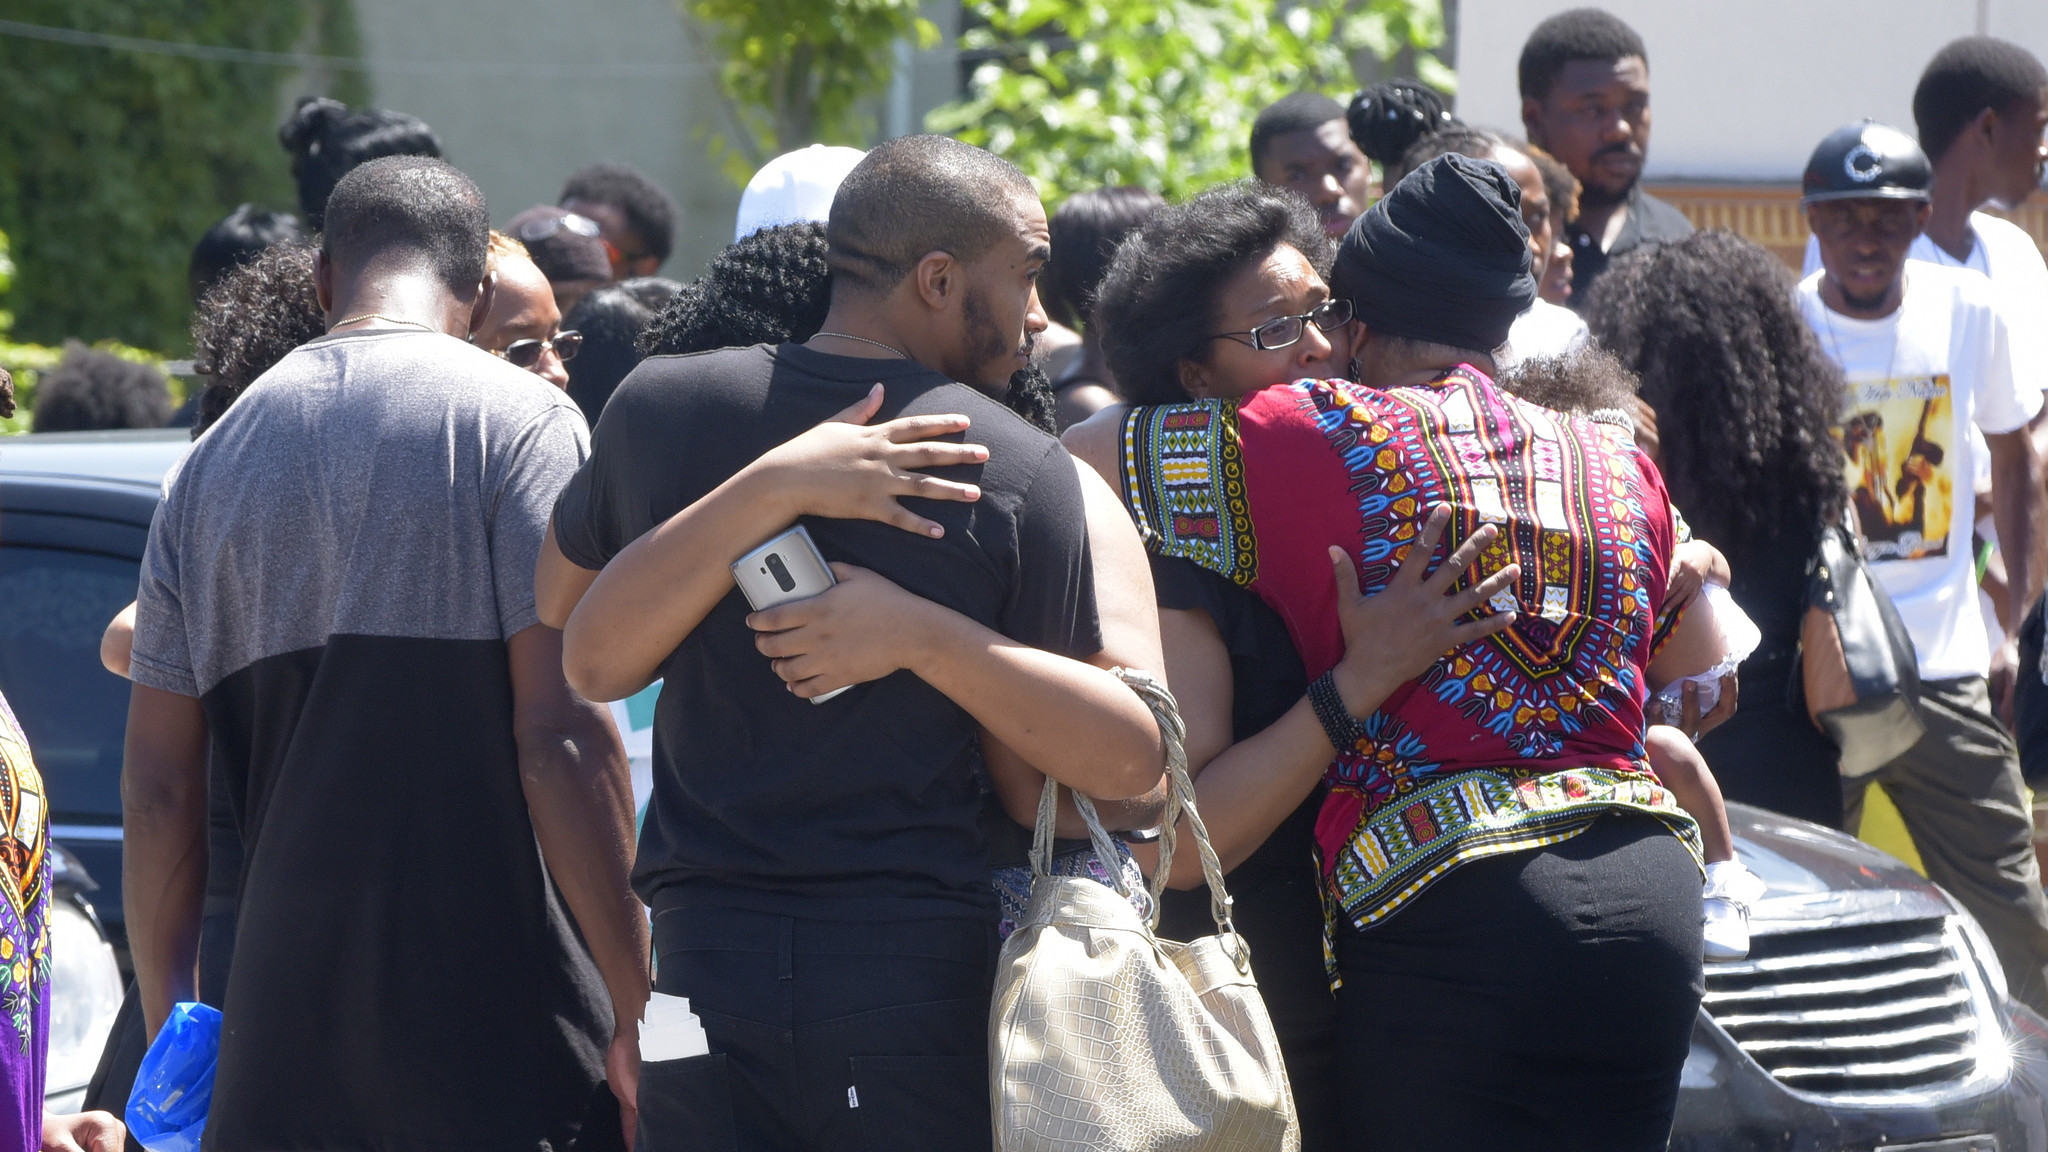 Mourners, including young son, attend funeral for Korryn Gaines - Baltimore Sun